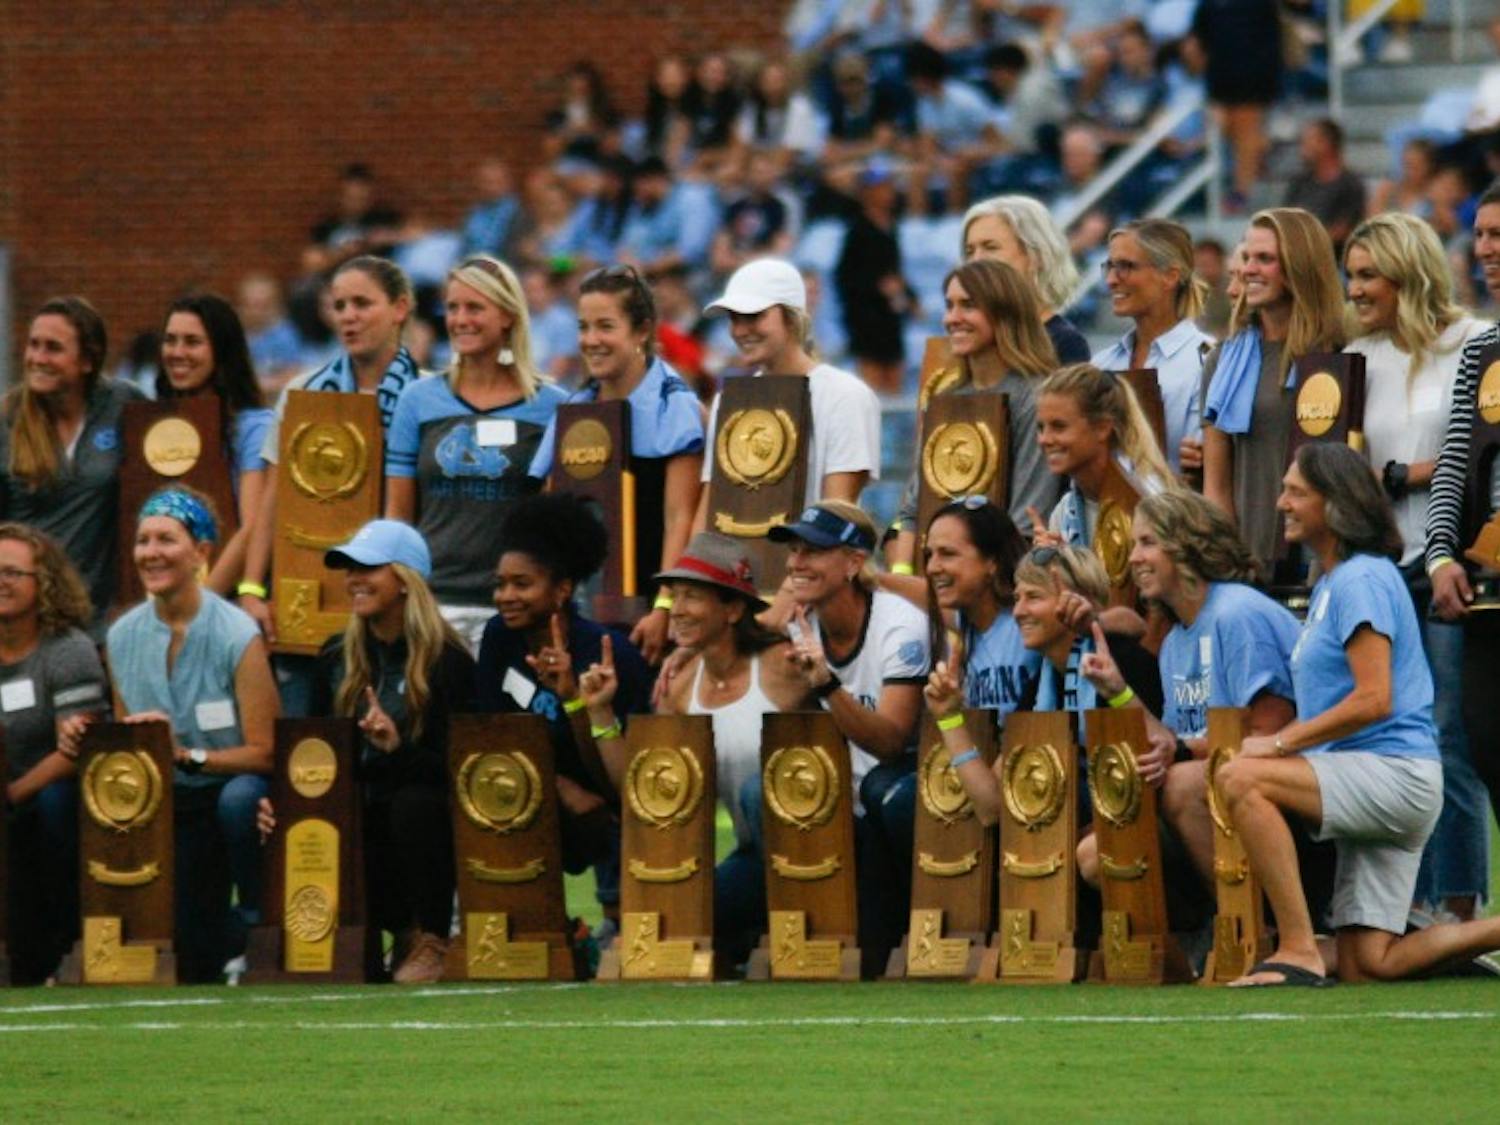 UNC women's soccer alumna pose for a picture after being recognized during halftime at the game against Duke on August 25, 2019. UNC beat Duke 2-0.